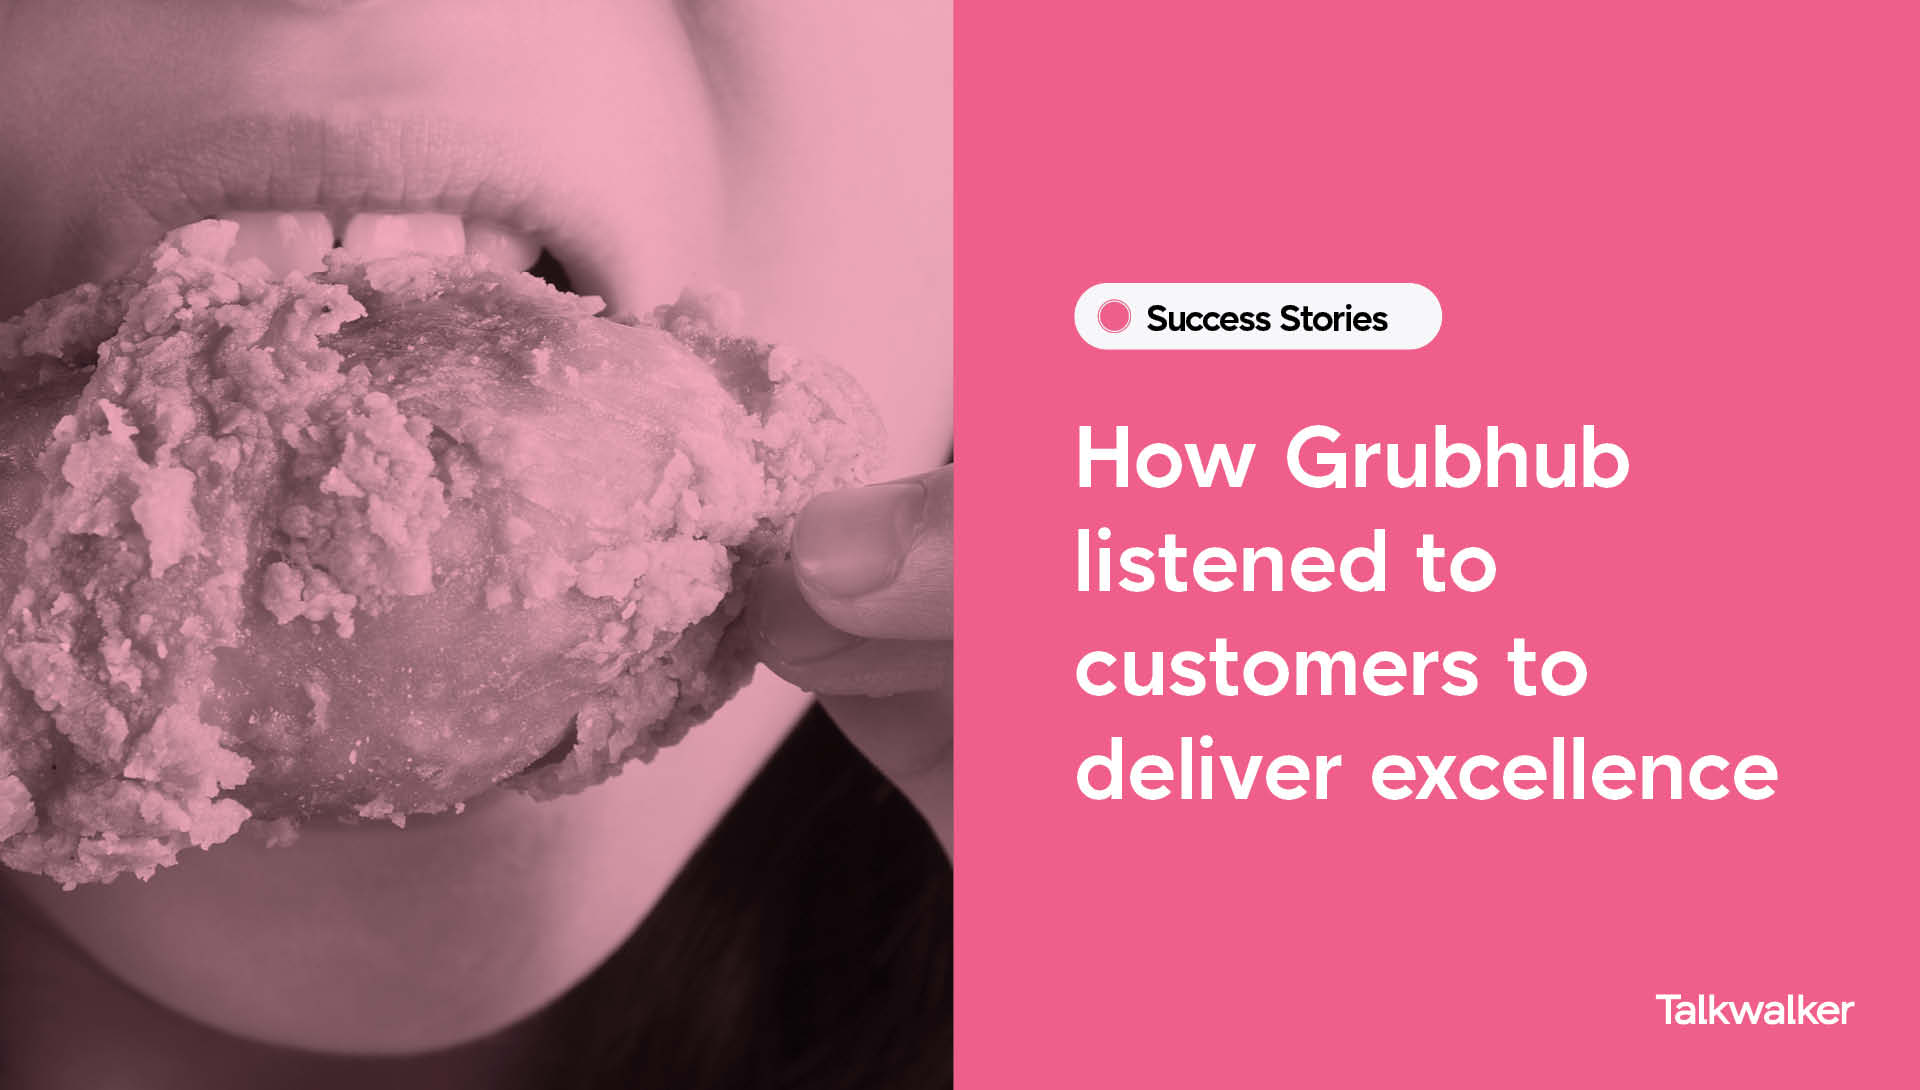 How Grubhub listened to customers to deliver excellence